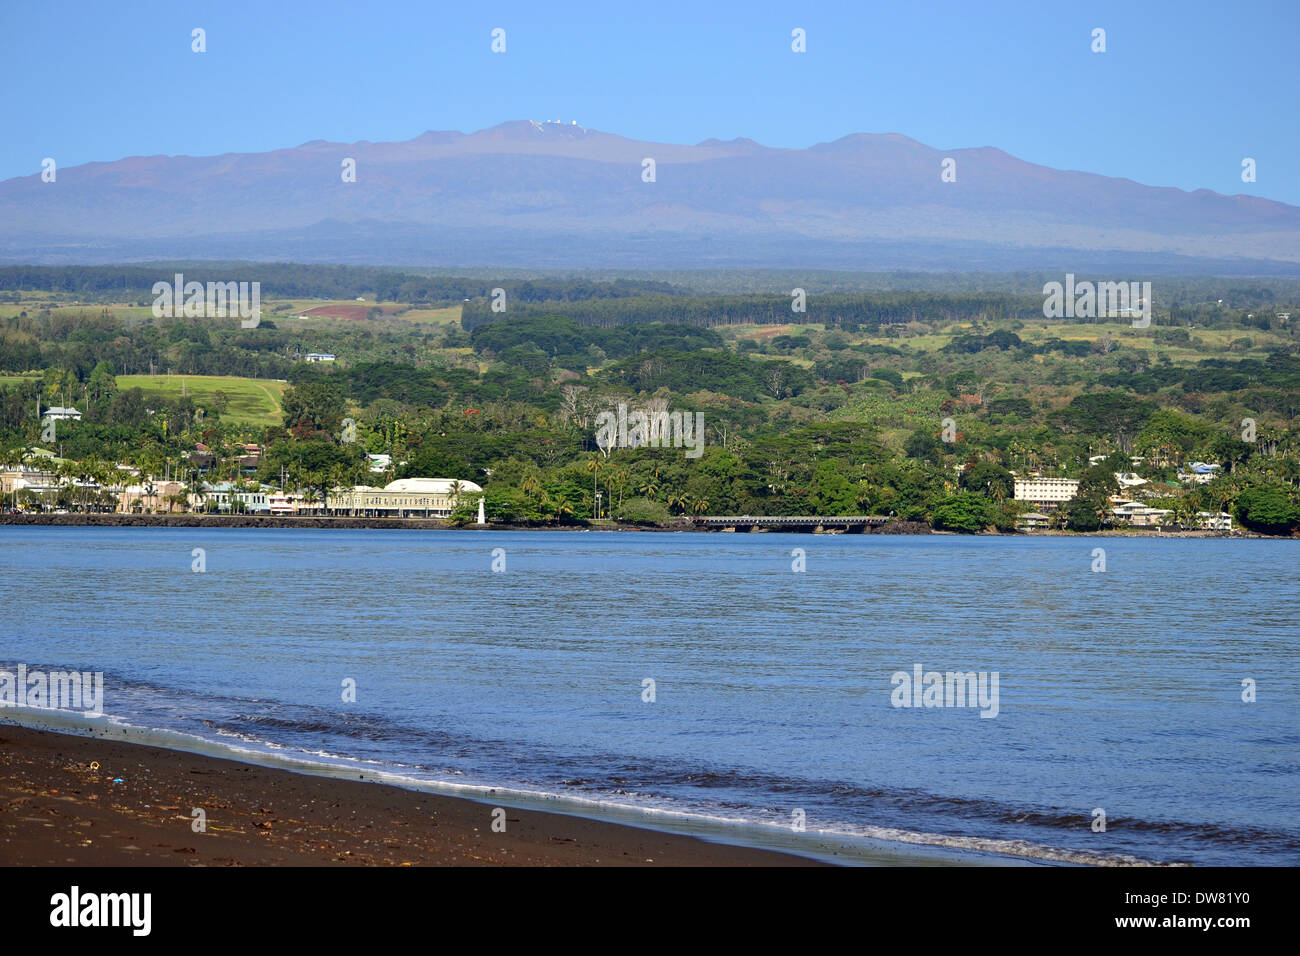 Mauna Kea, the largest and tallest mountain in the world, viewed from Hilo Bay in a clear day, Hilo, Big Island, Hawaii, USA Stock Photo